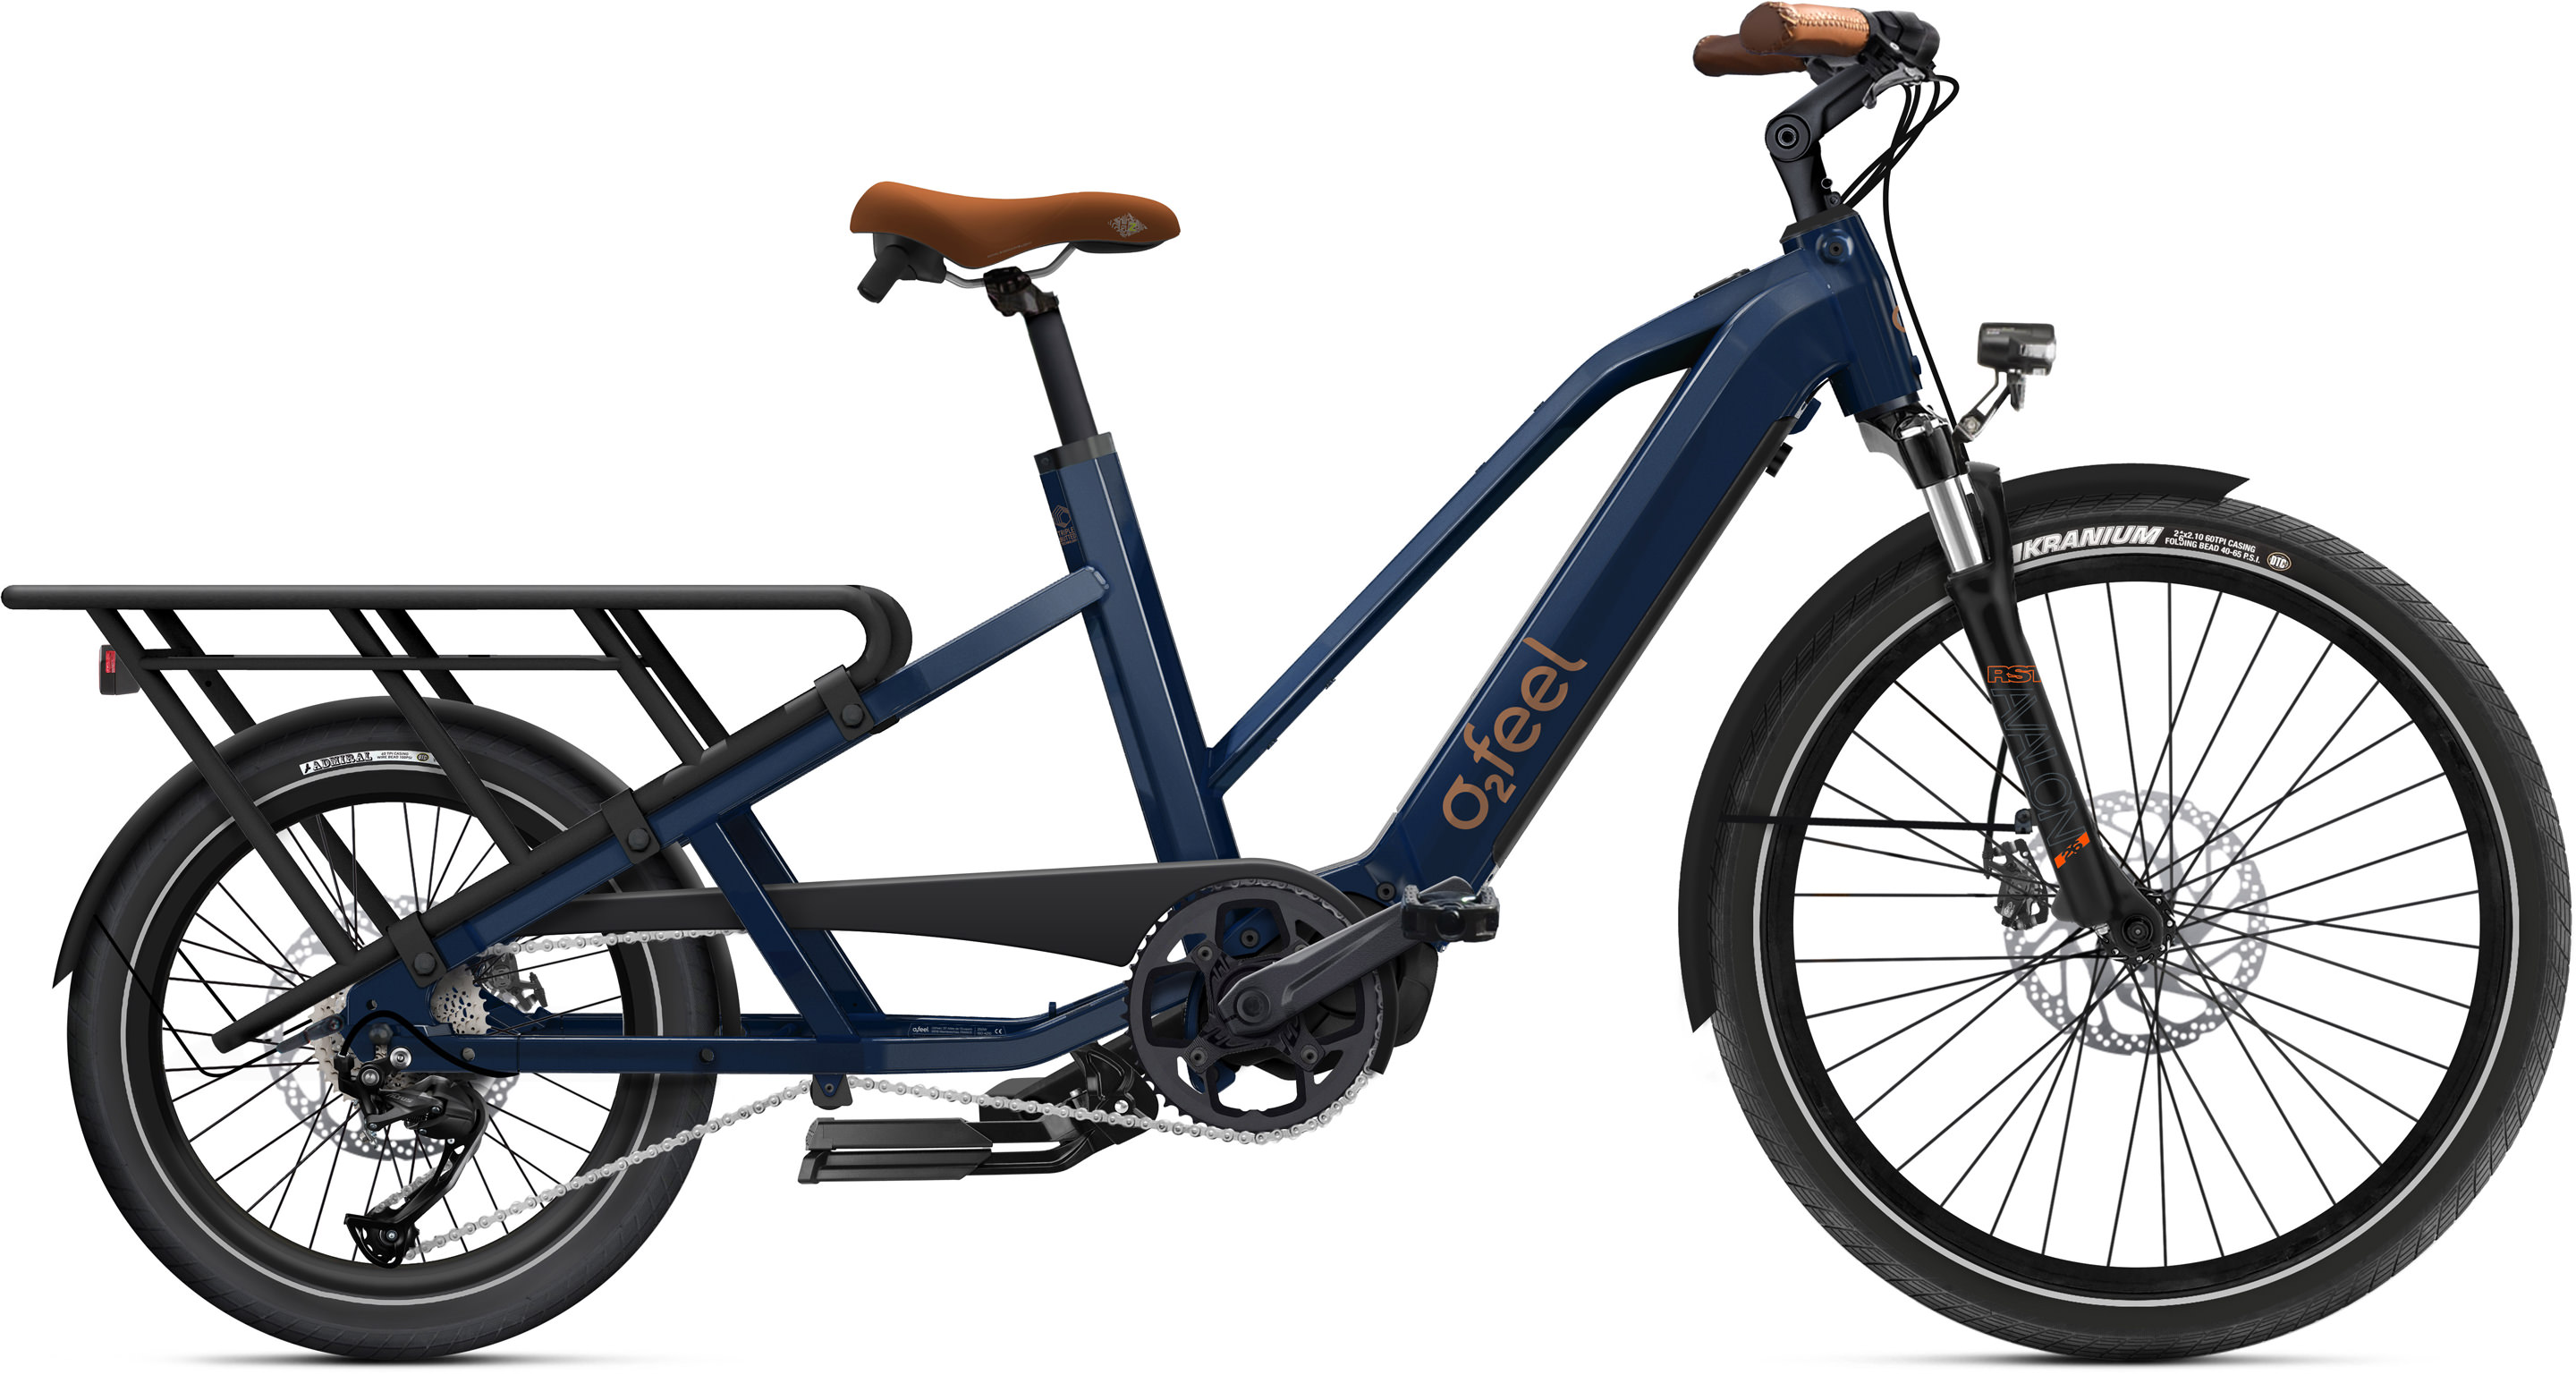 EQUO CARGO BOOST 3.1 - IPA432 | Bouticycle